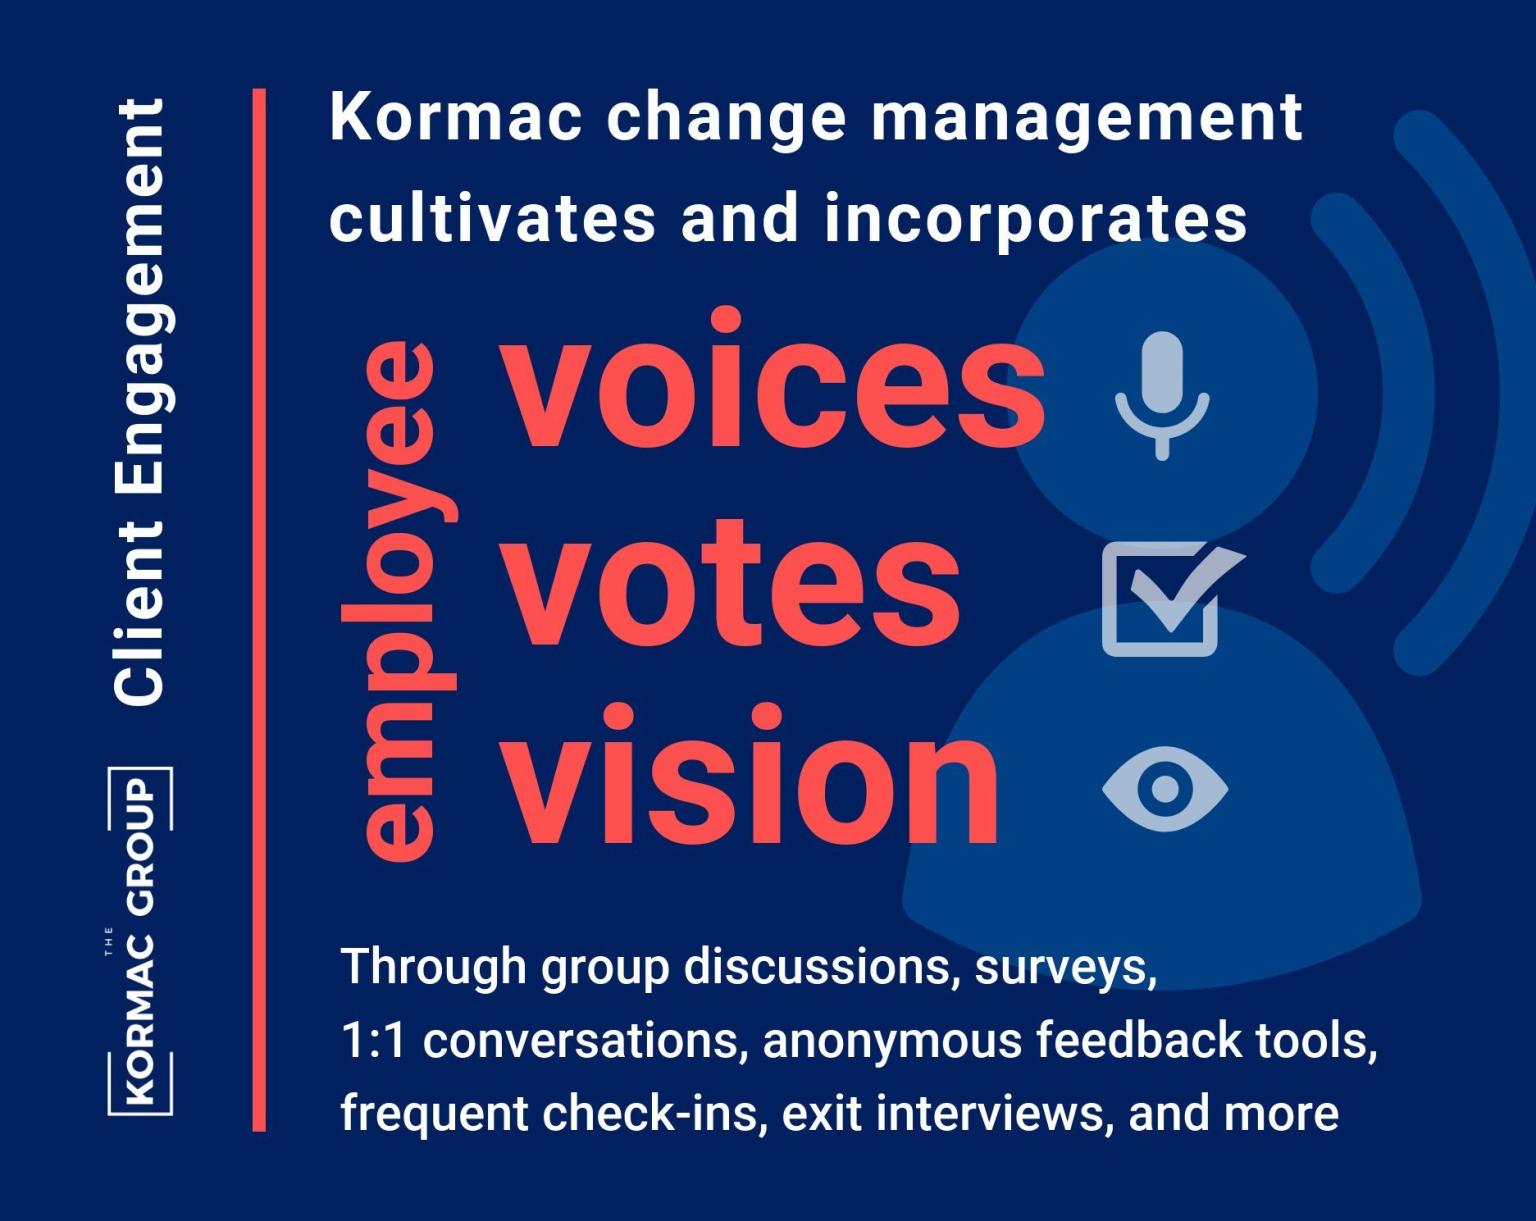 Client Engagement Kormac change management cultivates and incorporates employee voices, votes, vision. Through group discussions, surveys, 1:1 conversations, anonymous feedback tools, frequent check-ins, exit interviews, and more